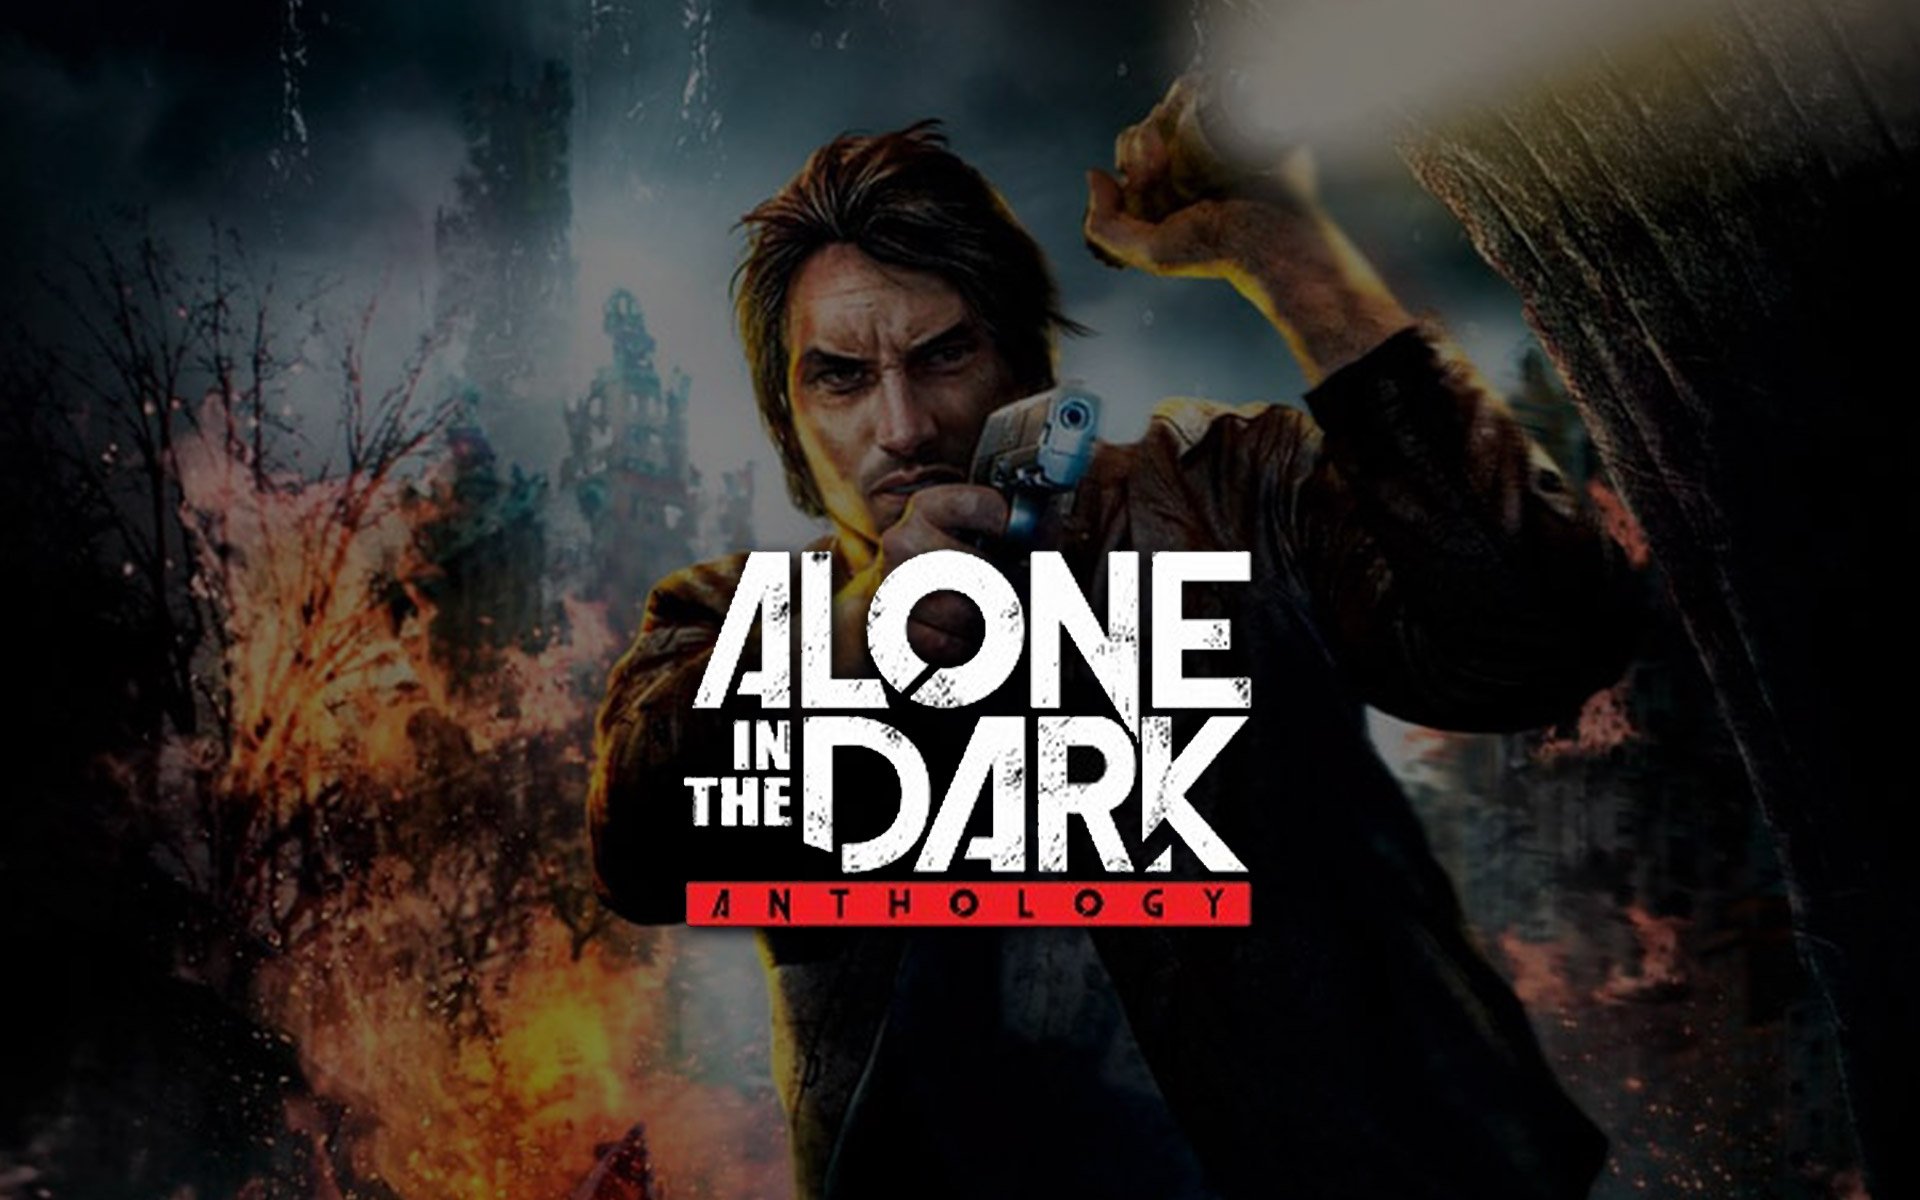 Alone in the Dark (2008) Anthology, PC Steam Game